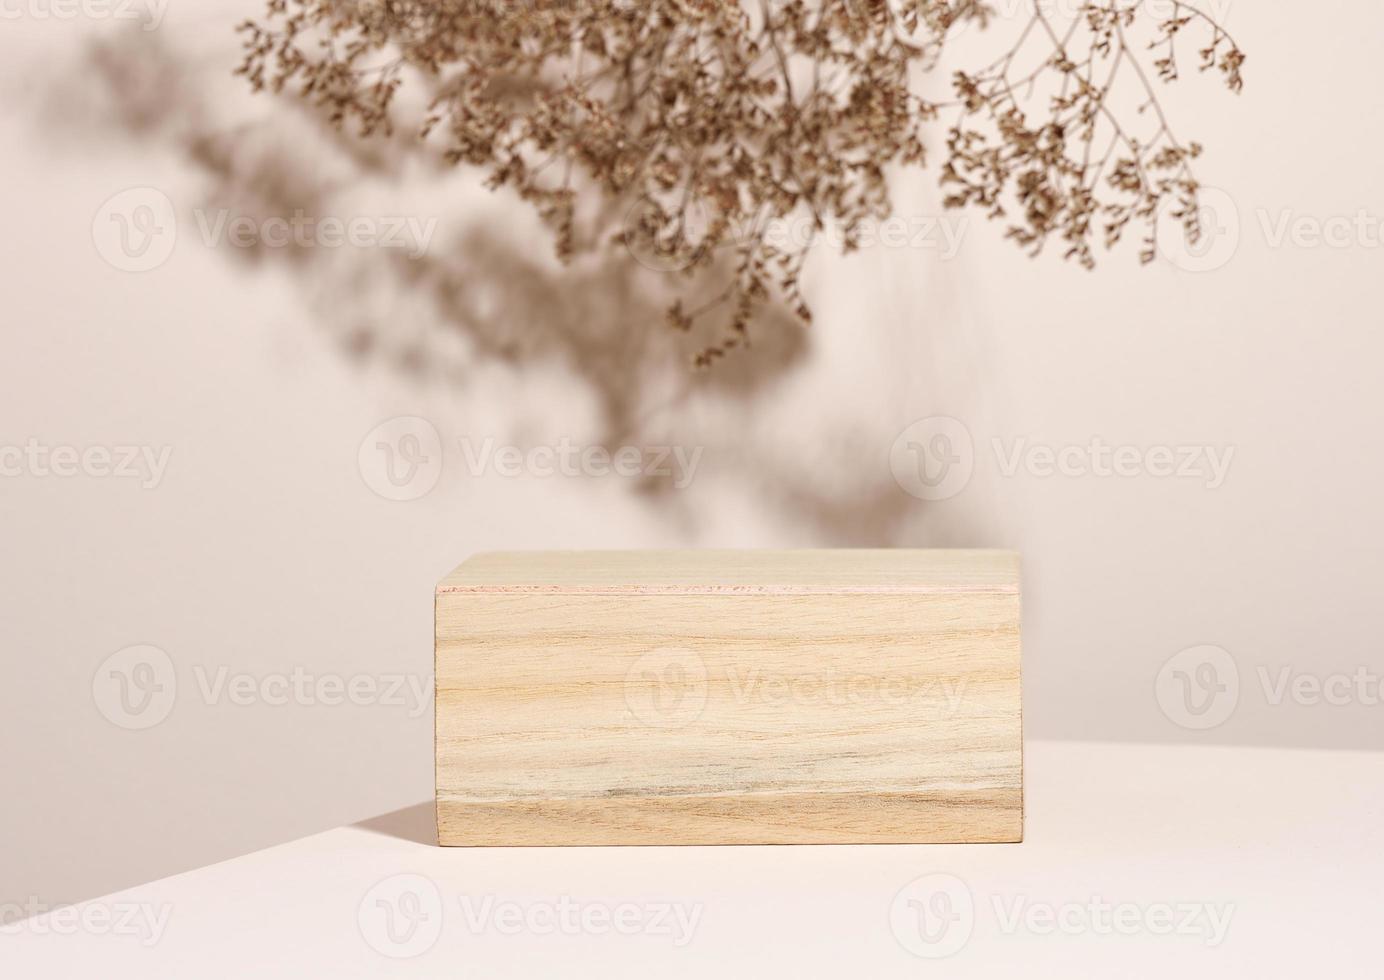 wooden podium to showcase cosmetics and other items, beige background with dry wildflowers and shadow photo